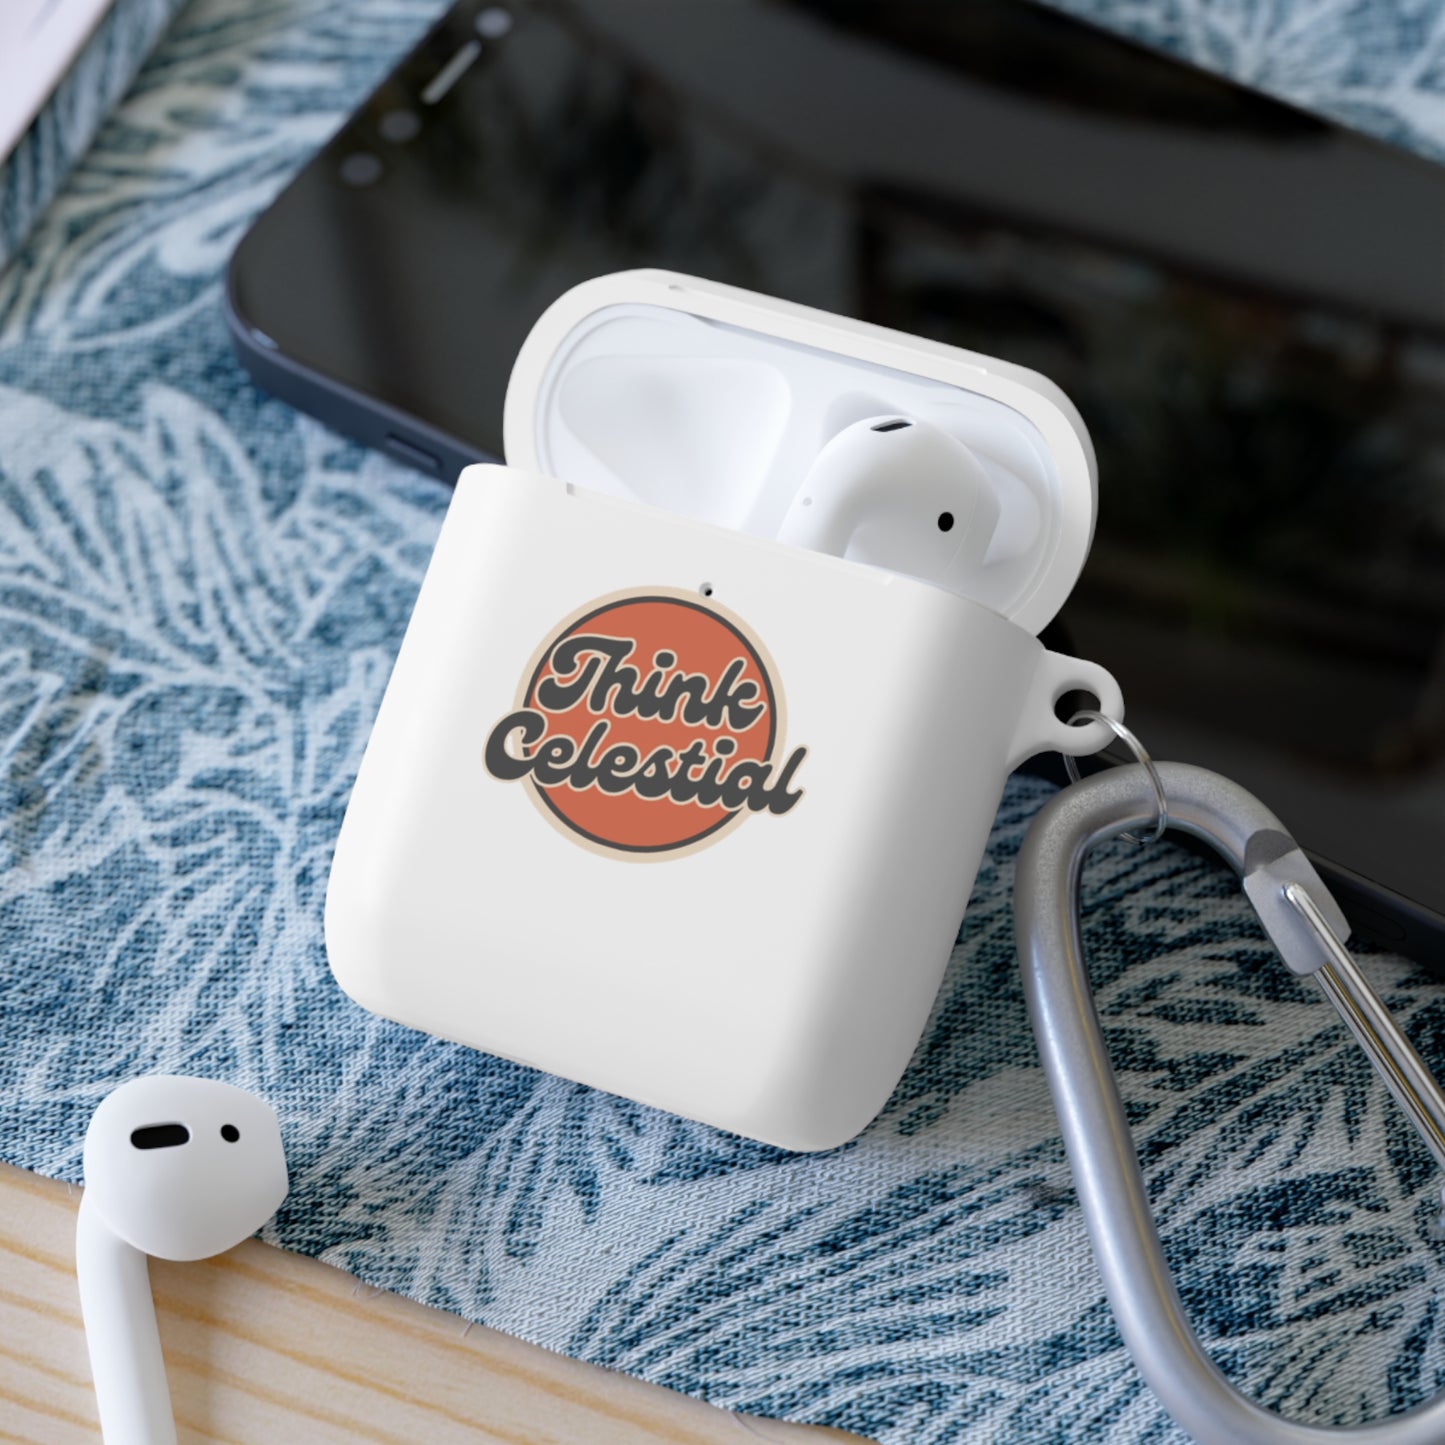 AirPods and AirPods Pro Retro Think Celestial Case Cover